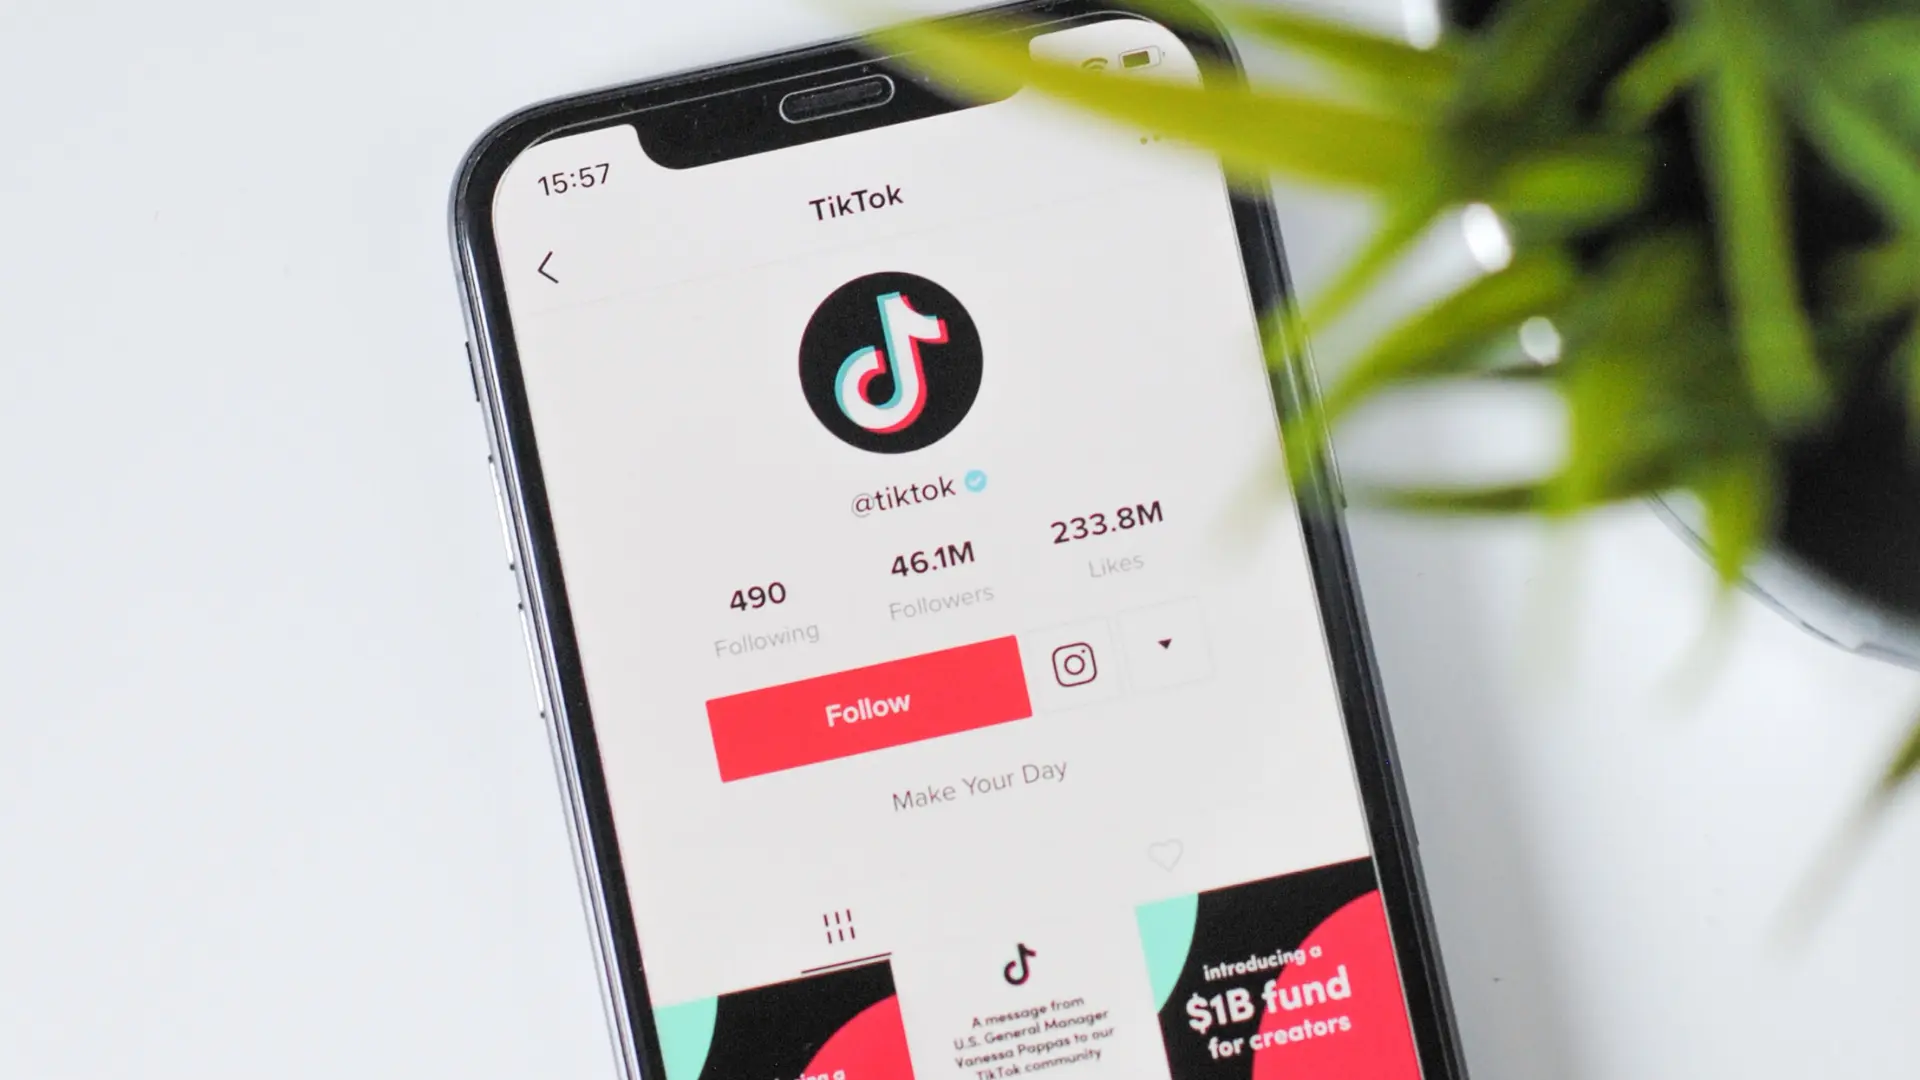 A guide on how to market your event on TikTok